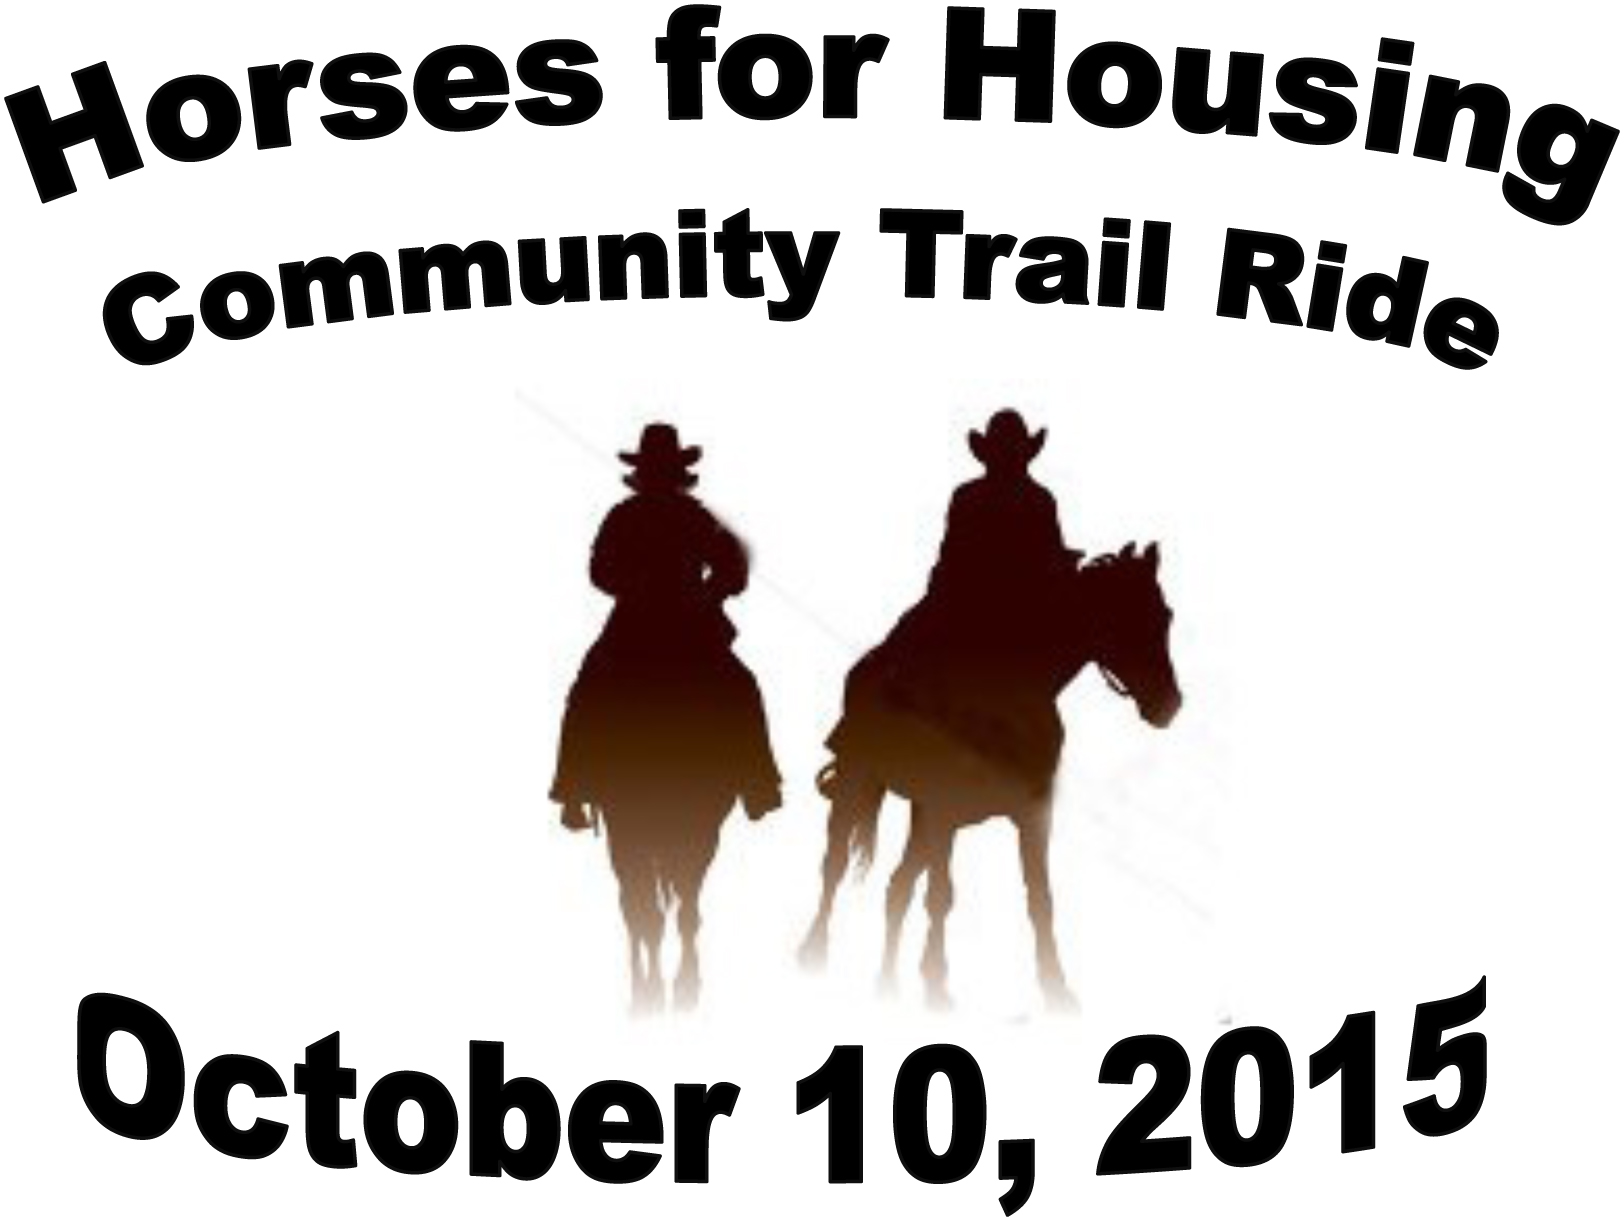 Horses For Housing Trail Ride